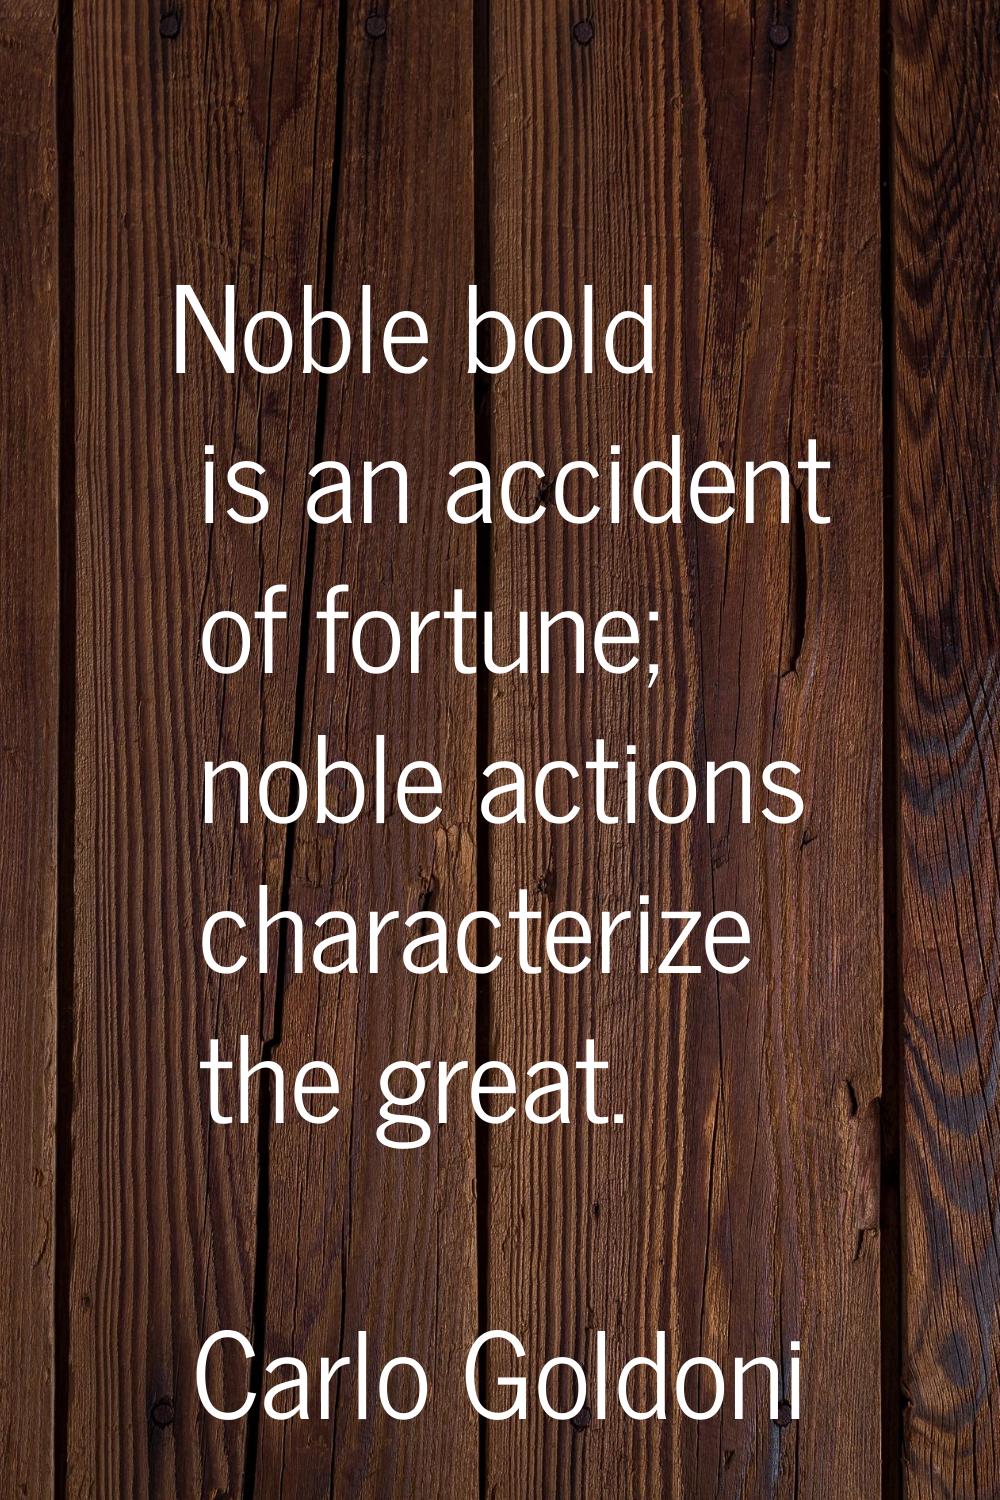 Noble bold is an accident of fortune; noble actions characterize the great.